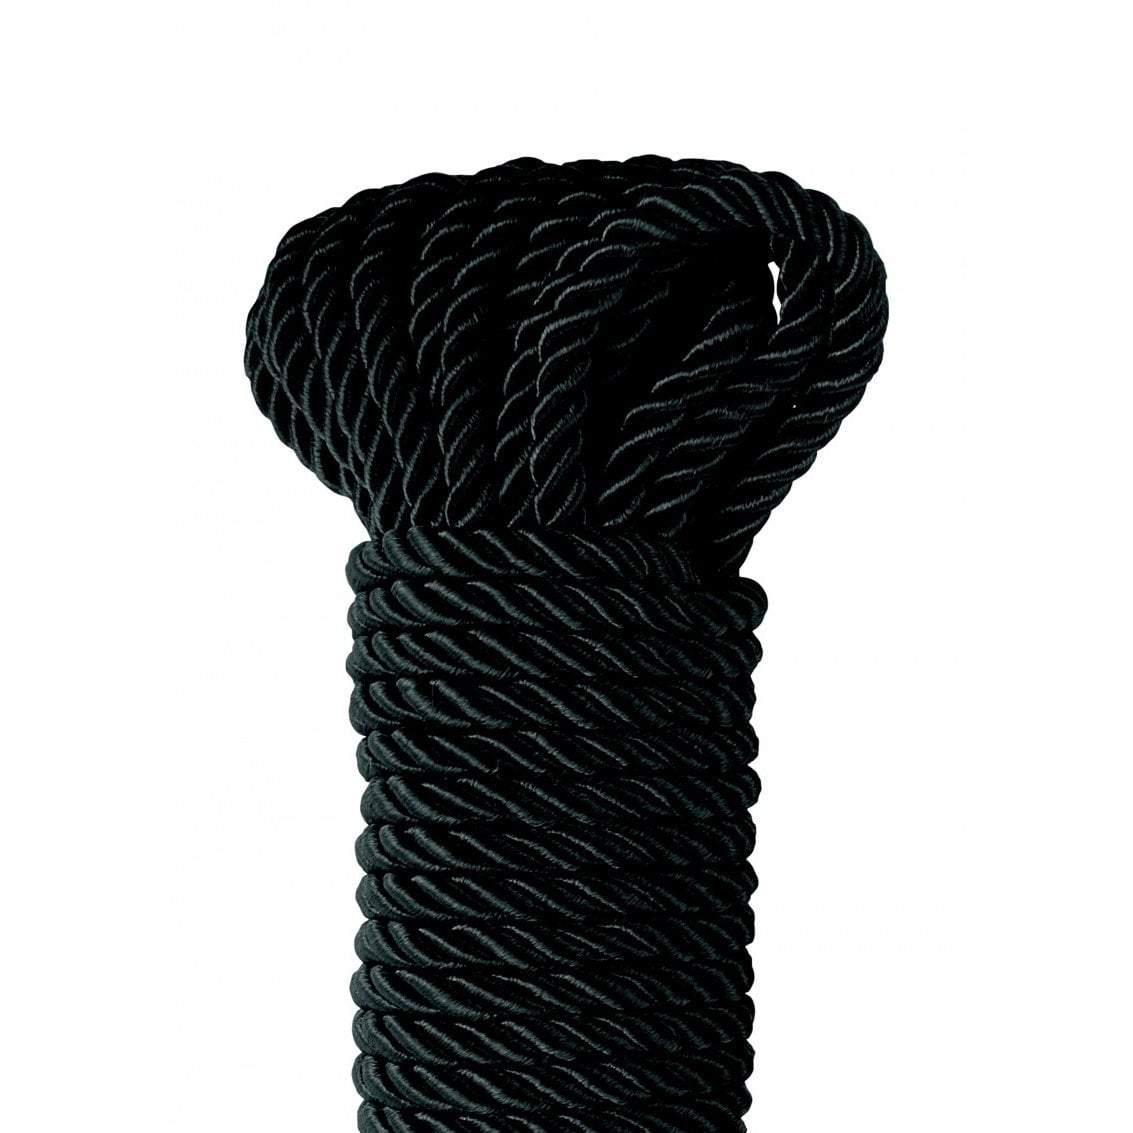 Pipedream - Fetish Fantasy Series  Deluxe Silky Rope 32 Ft (Black) PD1717 CherryAffairs